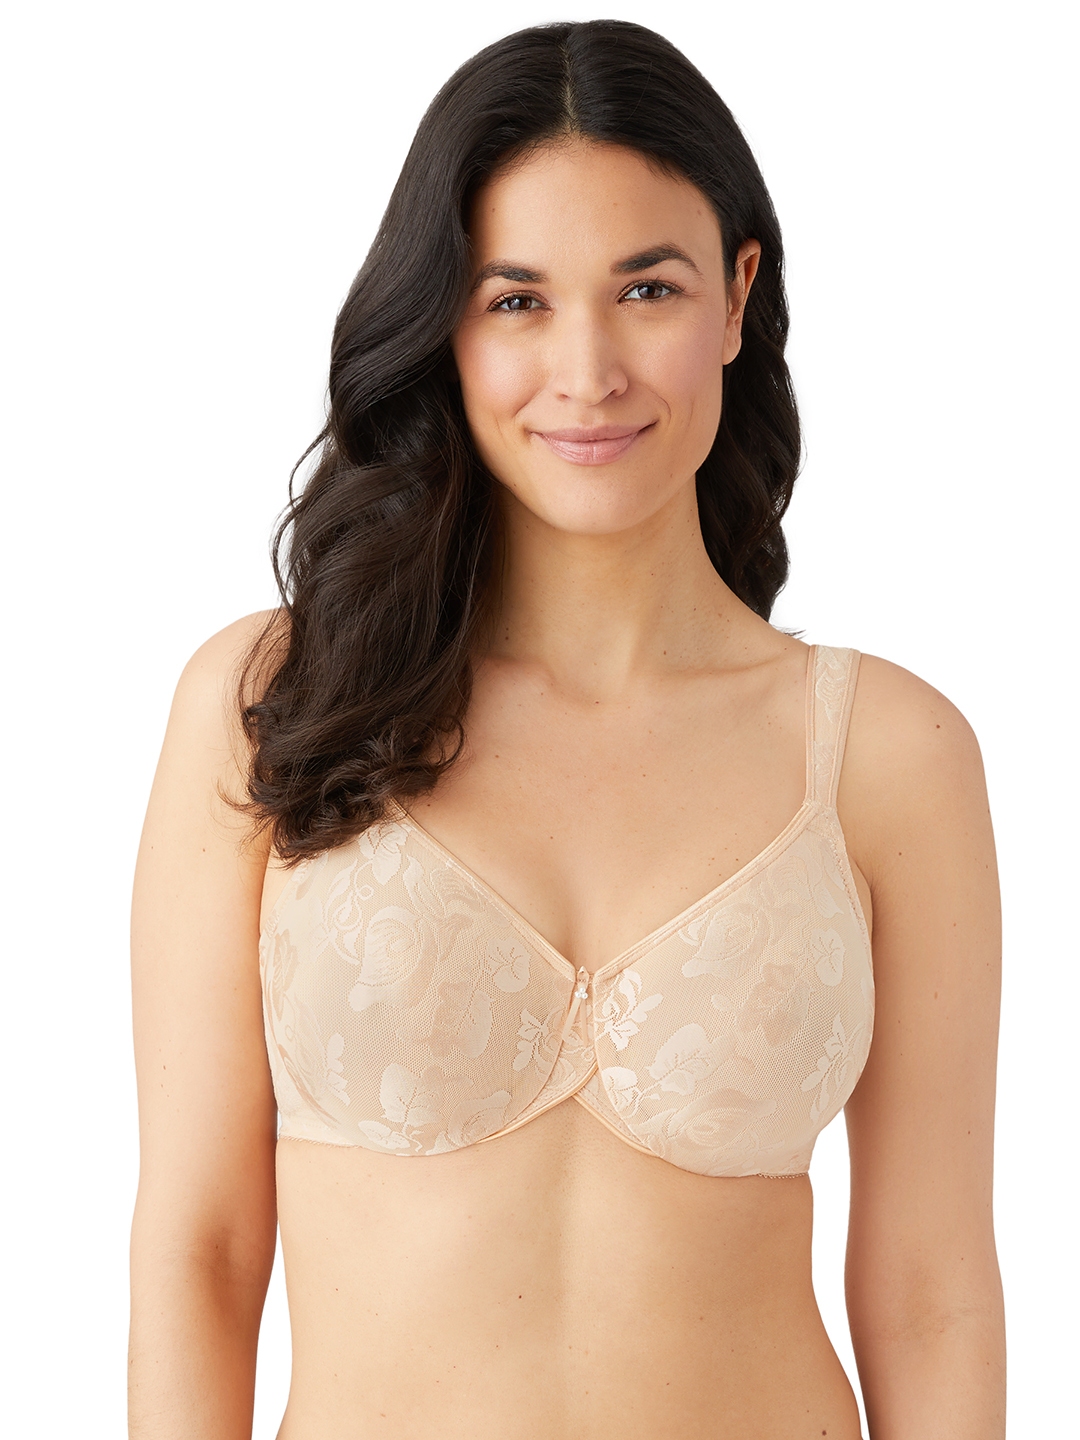 32E Bra Size in Nude Lace Cup and Three Section Cup Bras